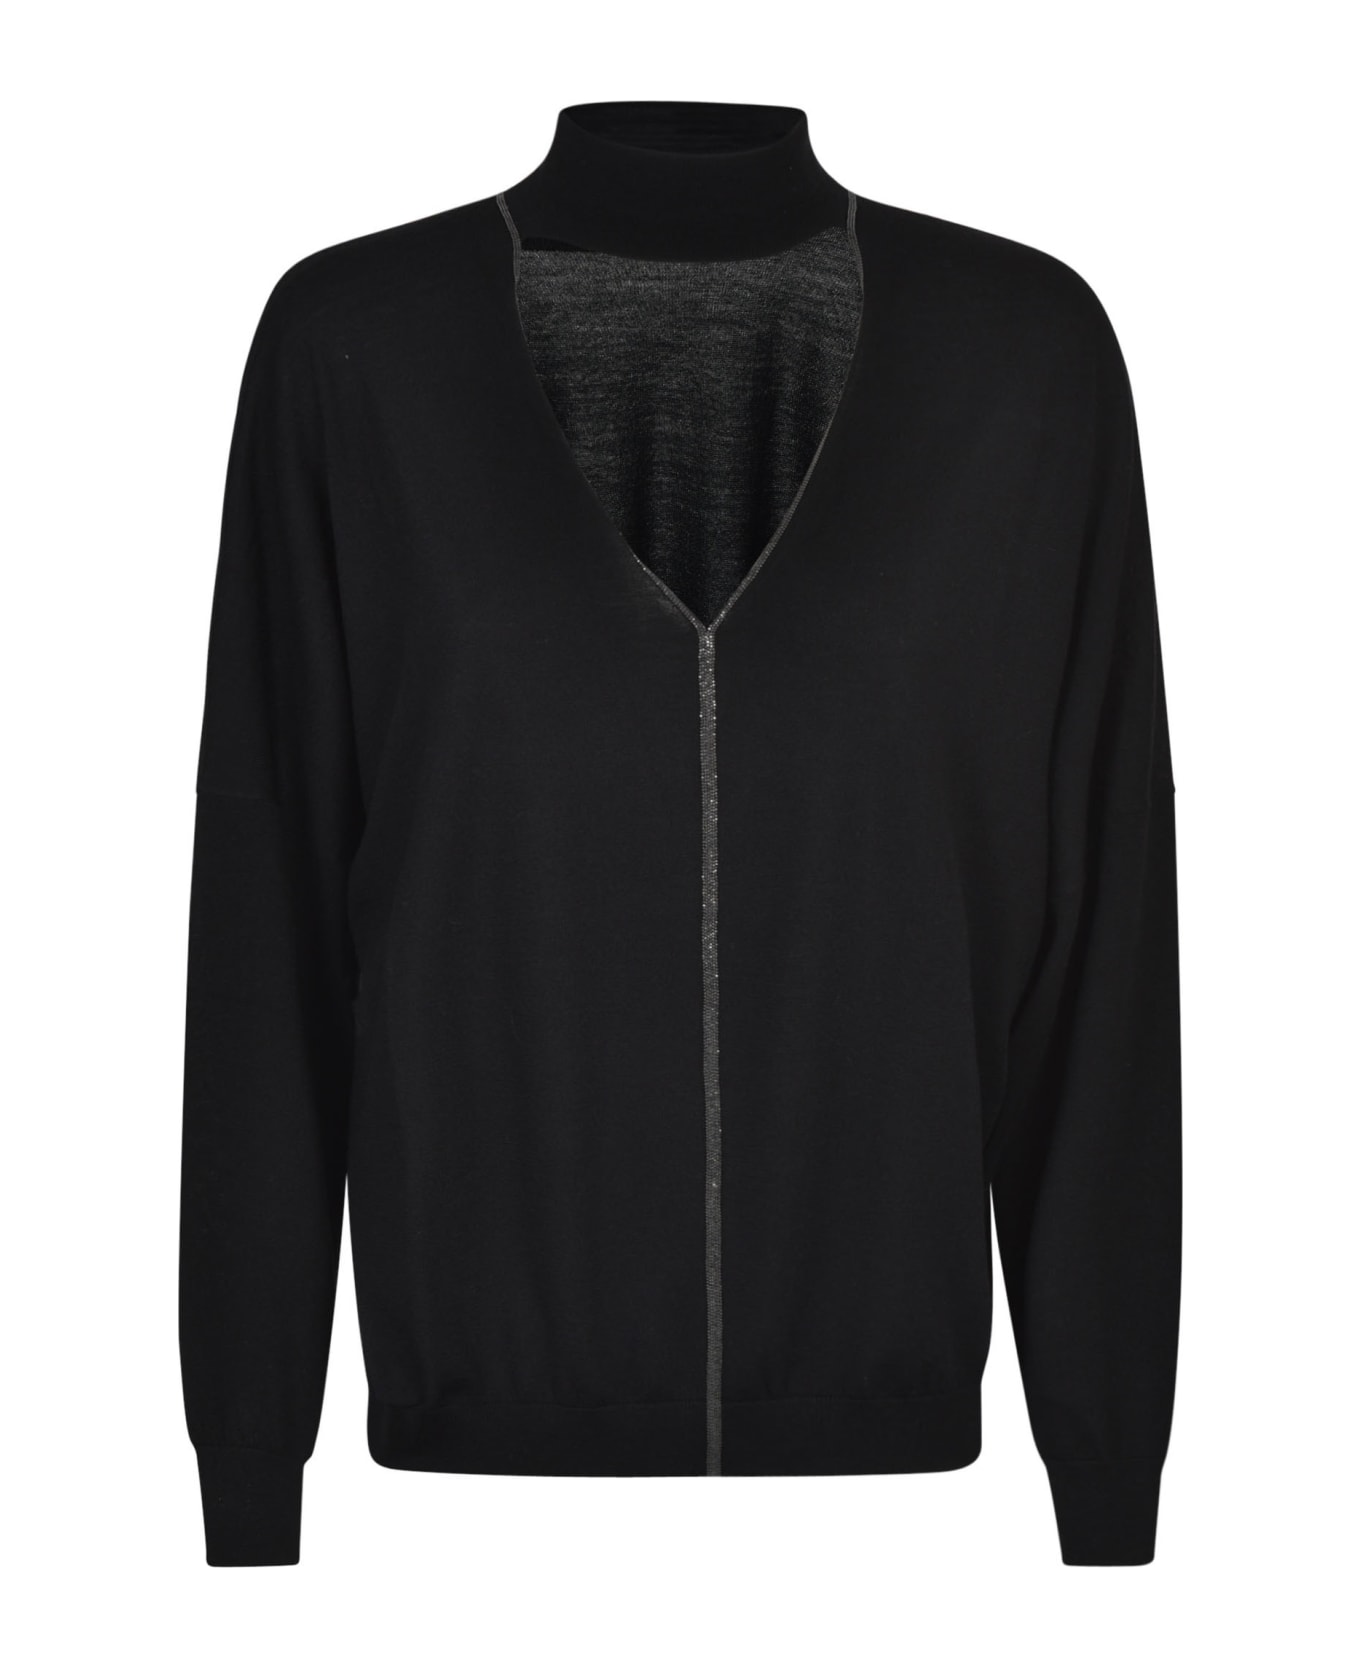 Brunello Cucinelli Cut-out Detail Embellished Sweater - Black